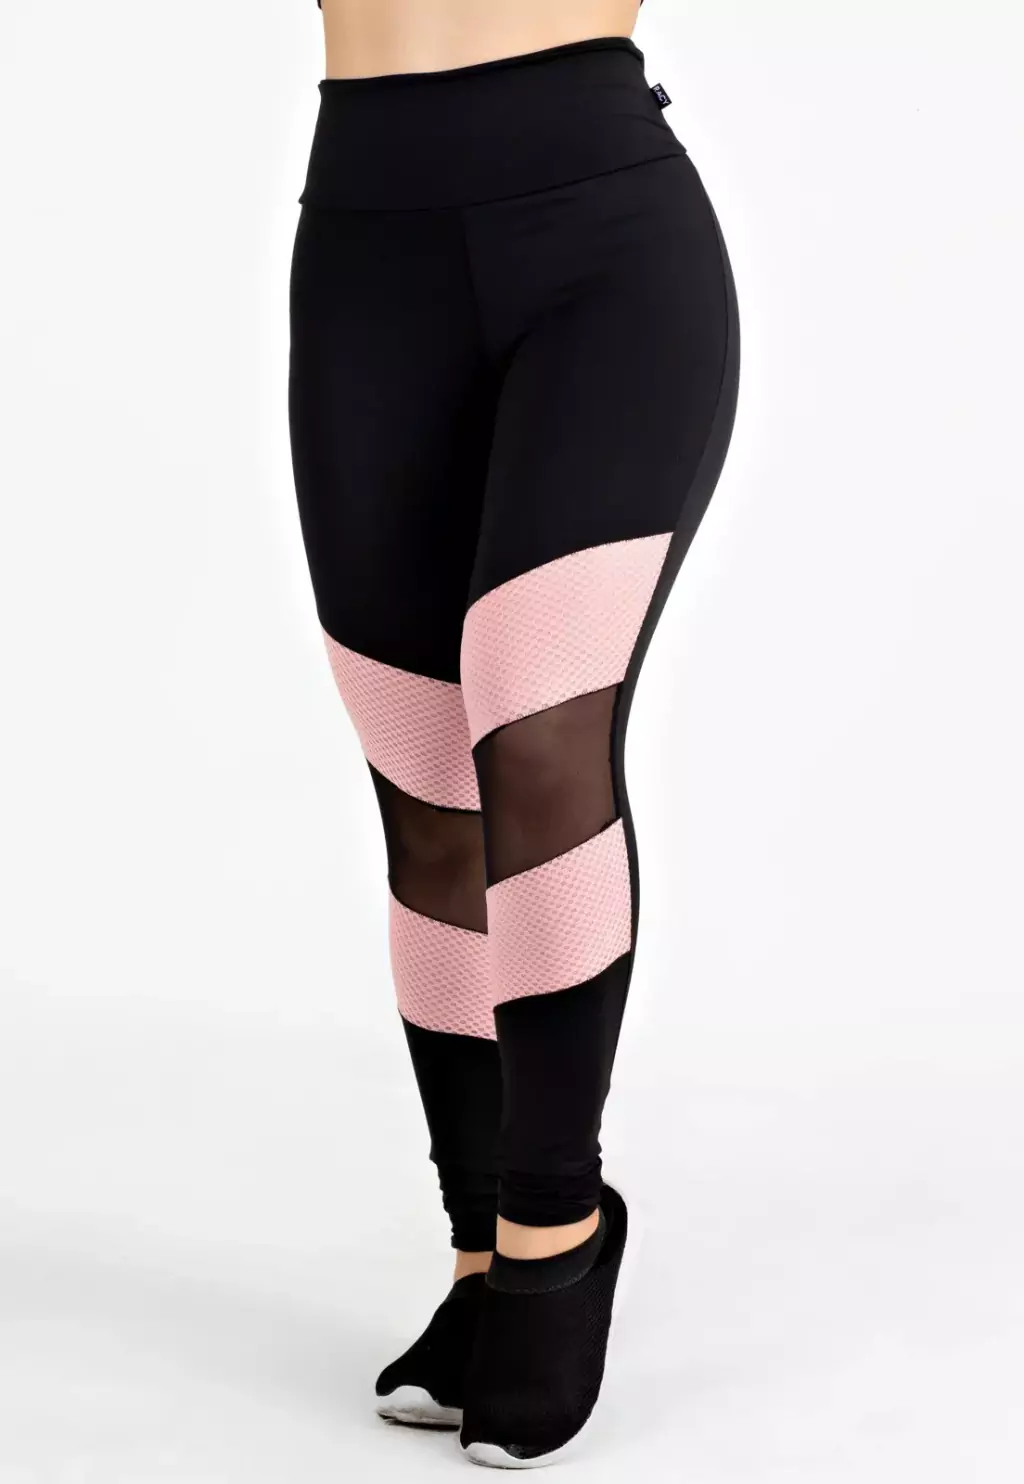 Are you interested in wearing transparent leggings? - Quora